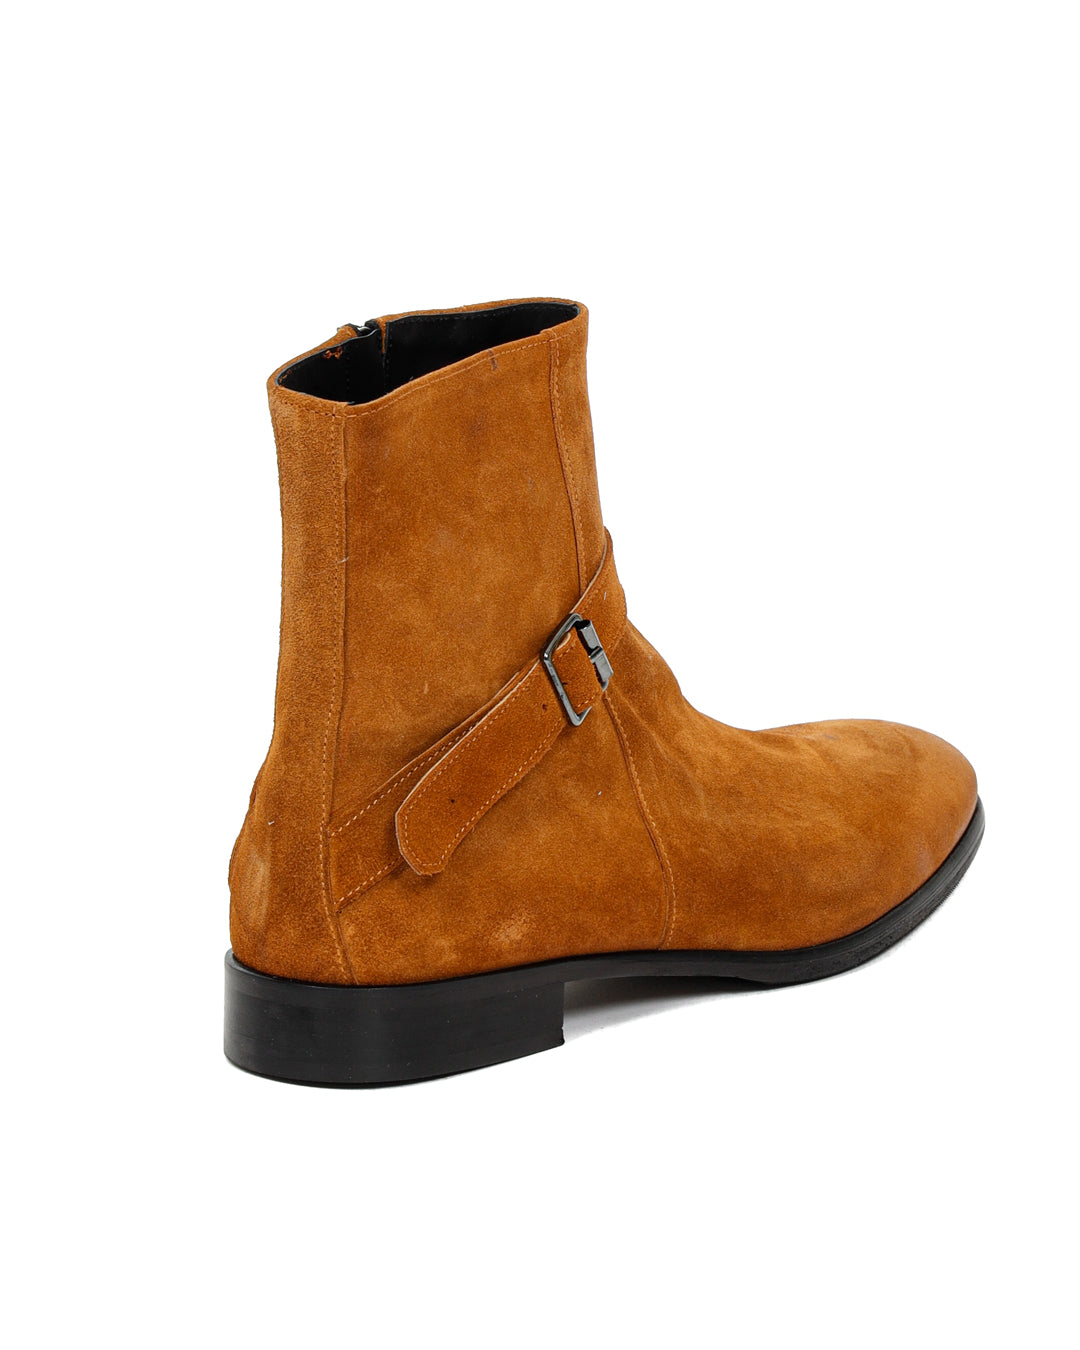 Neil - camel suede ankle boot with strap